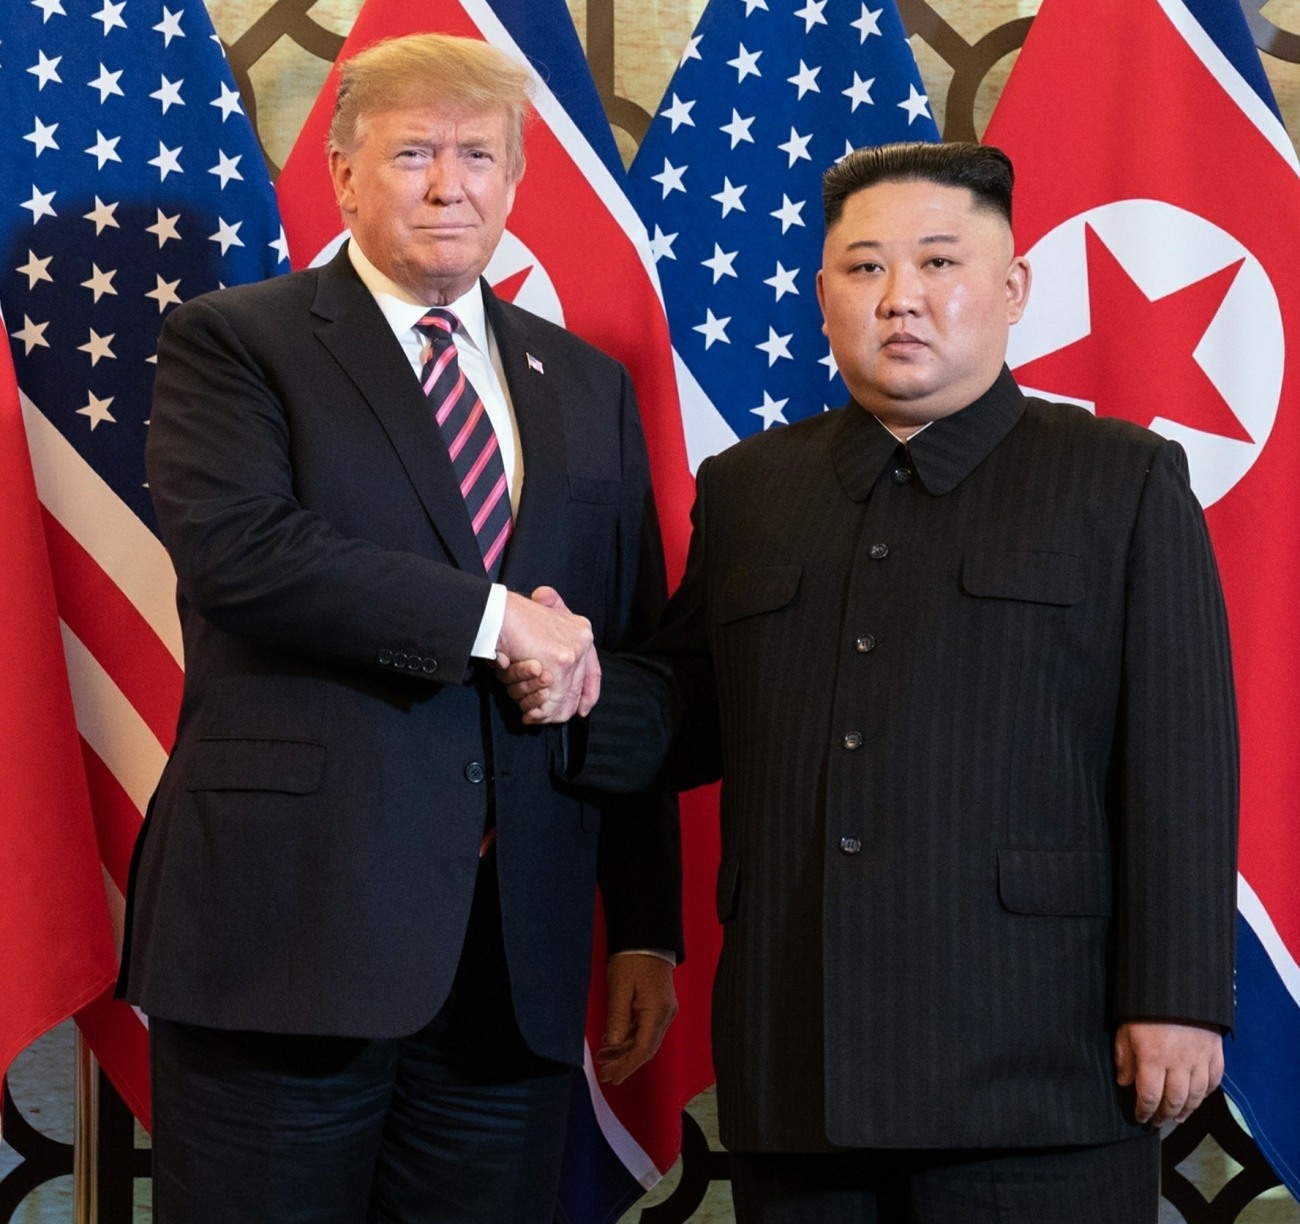 President Donald Trump and Kim Jong-un at a meeting at the Sofitel Legend Metropole Hotel in Hanoi